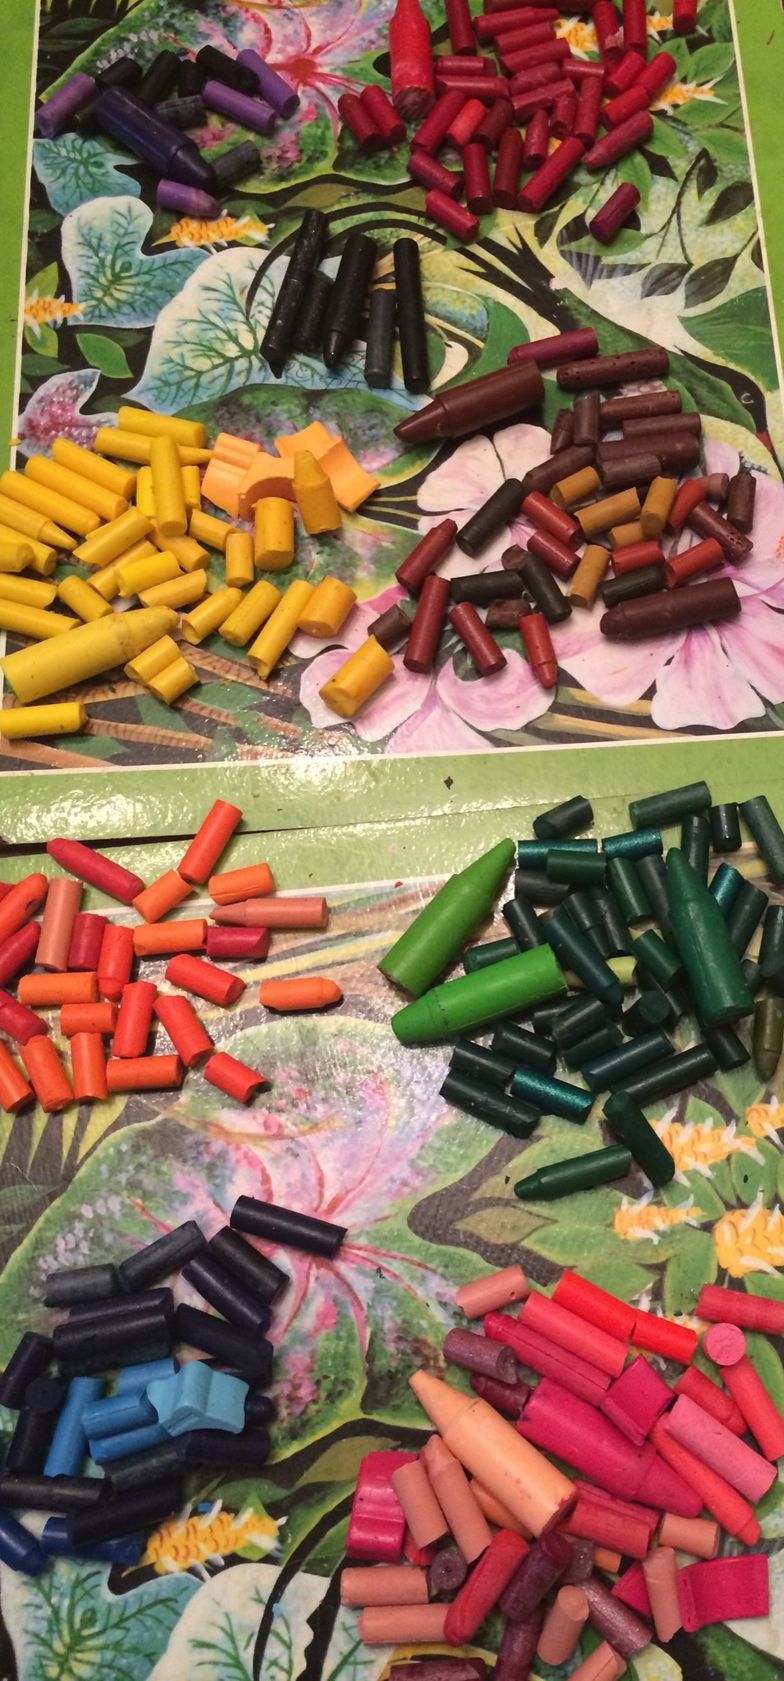 Craft Knife: Upcycle Your Crayons!: How to Make New Crayons from